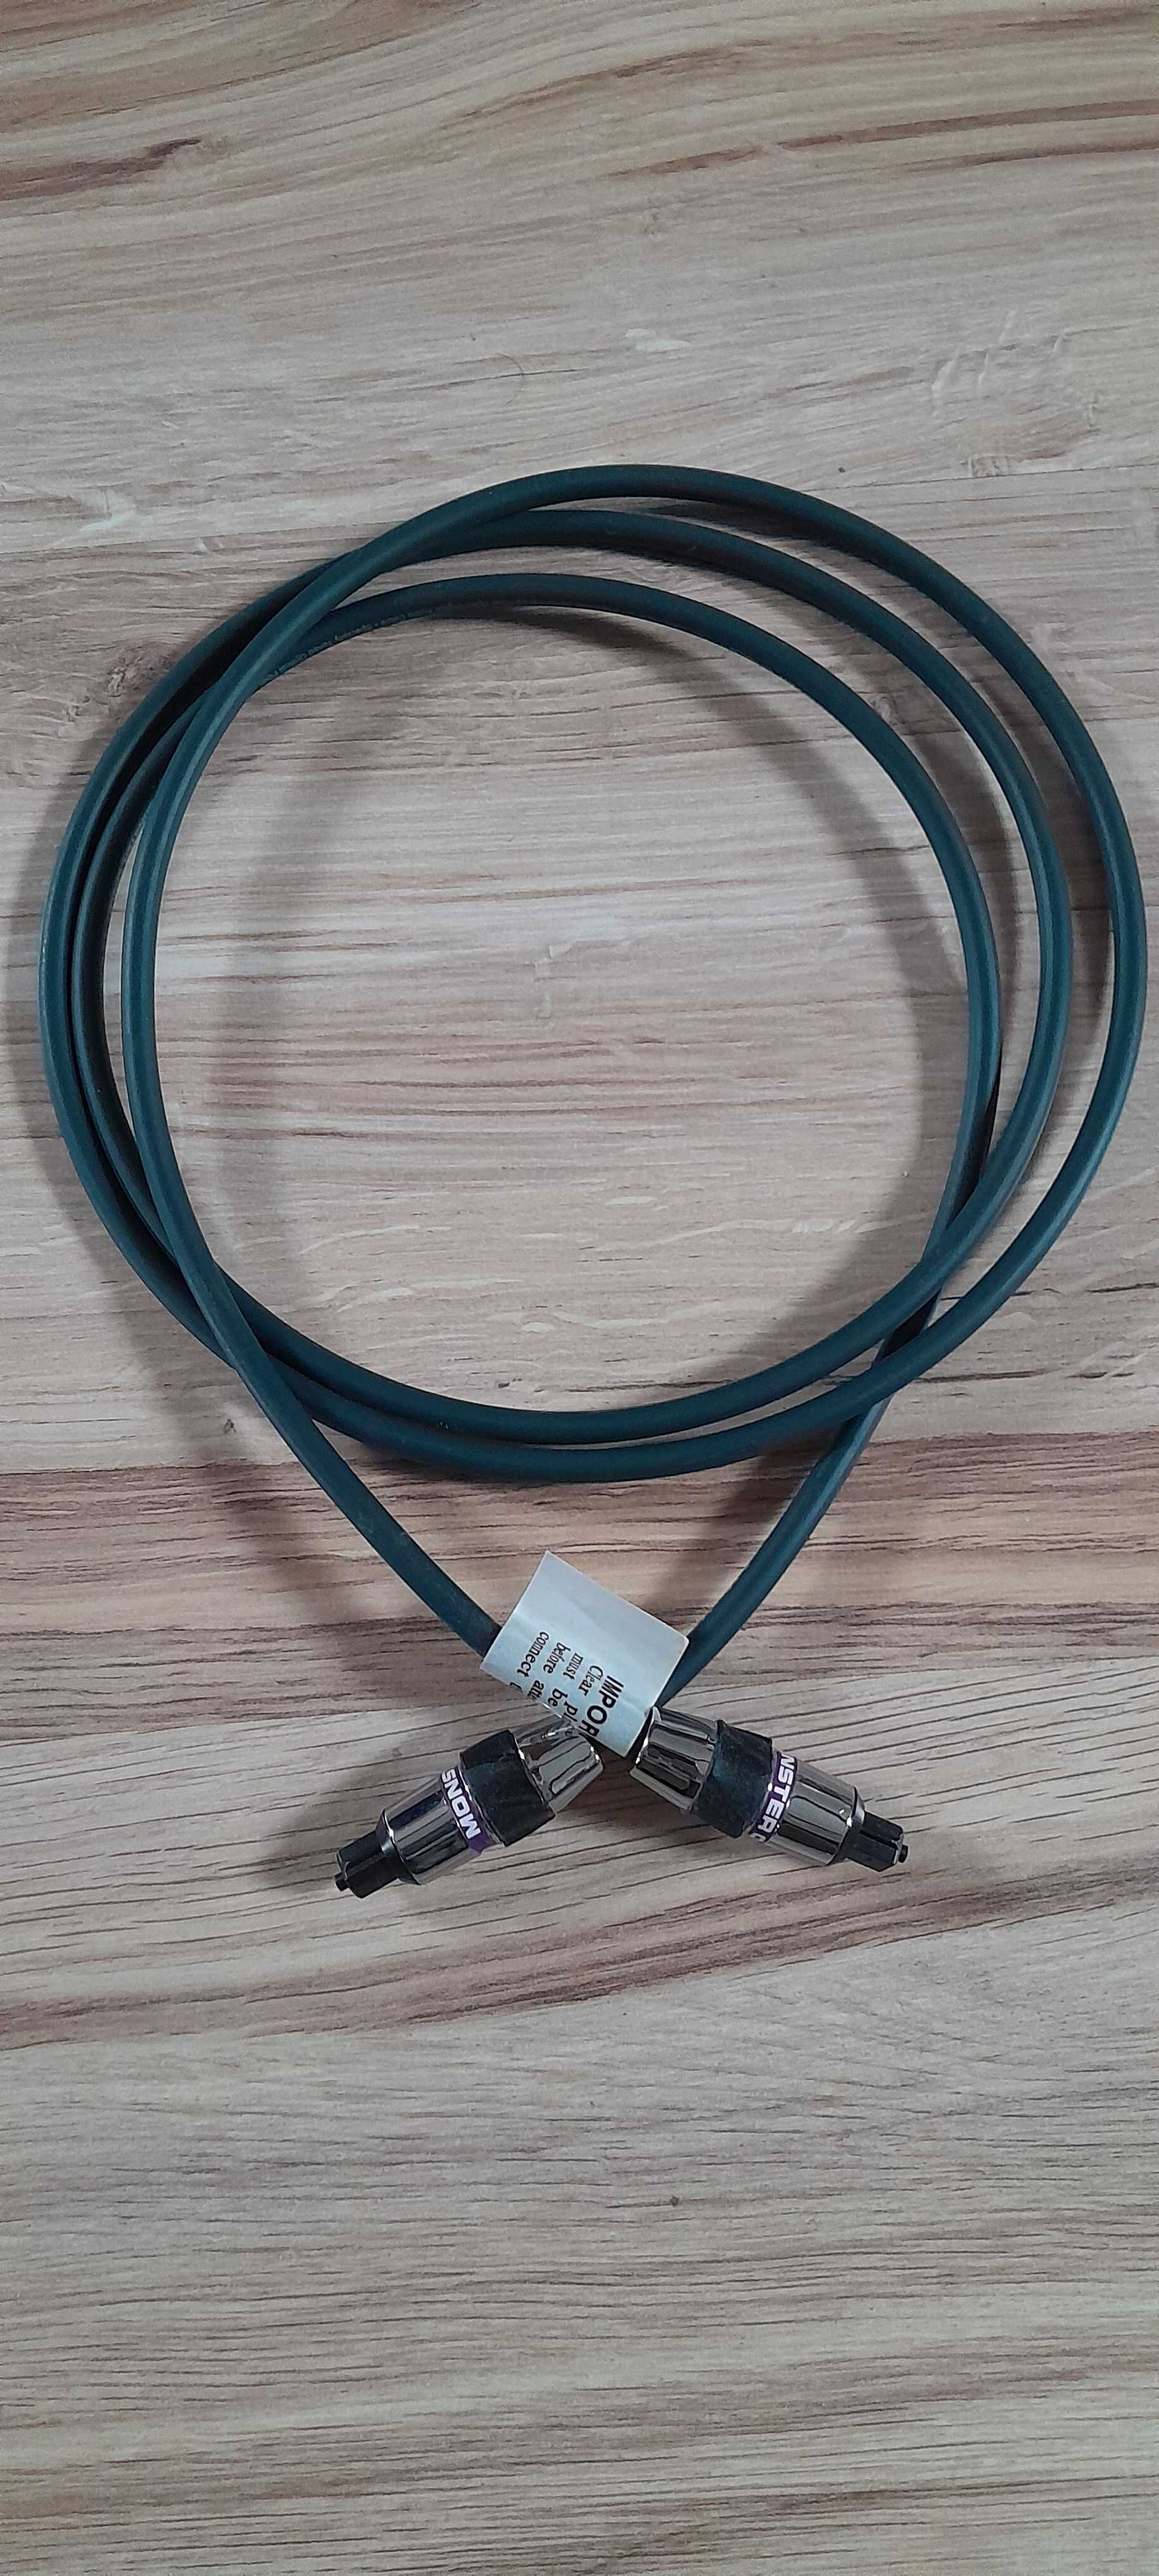 Toslink optyczny Monster Fiber Optic 450DFO 1.5m kabel cyfrowy